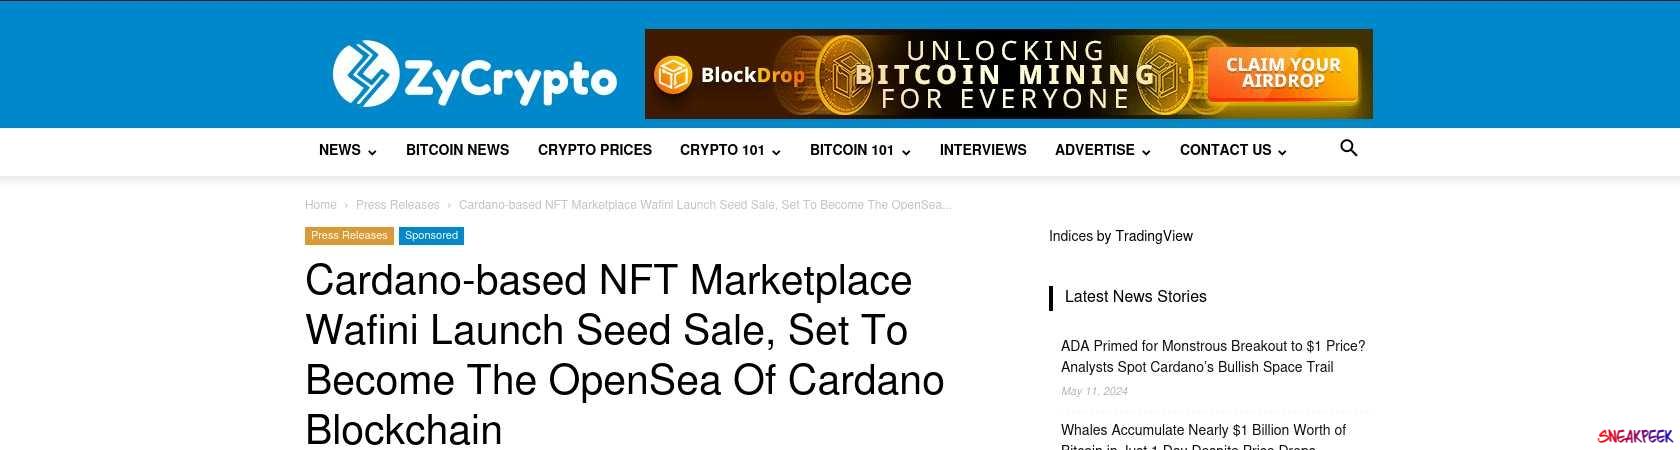 Read the full Article:  ⭲ Cardano-based NFT Marketplace Wafini Launch Seed Sale, Set To Become The OpenSea Of Cardano Blockchain